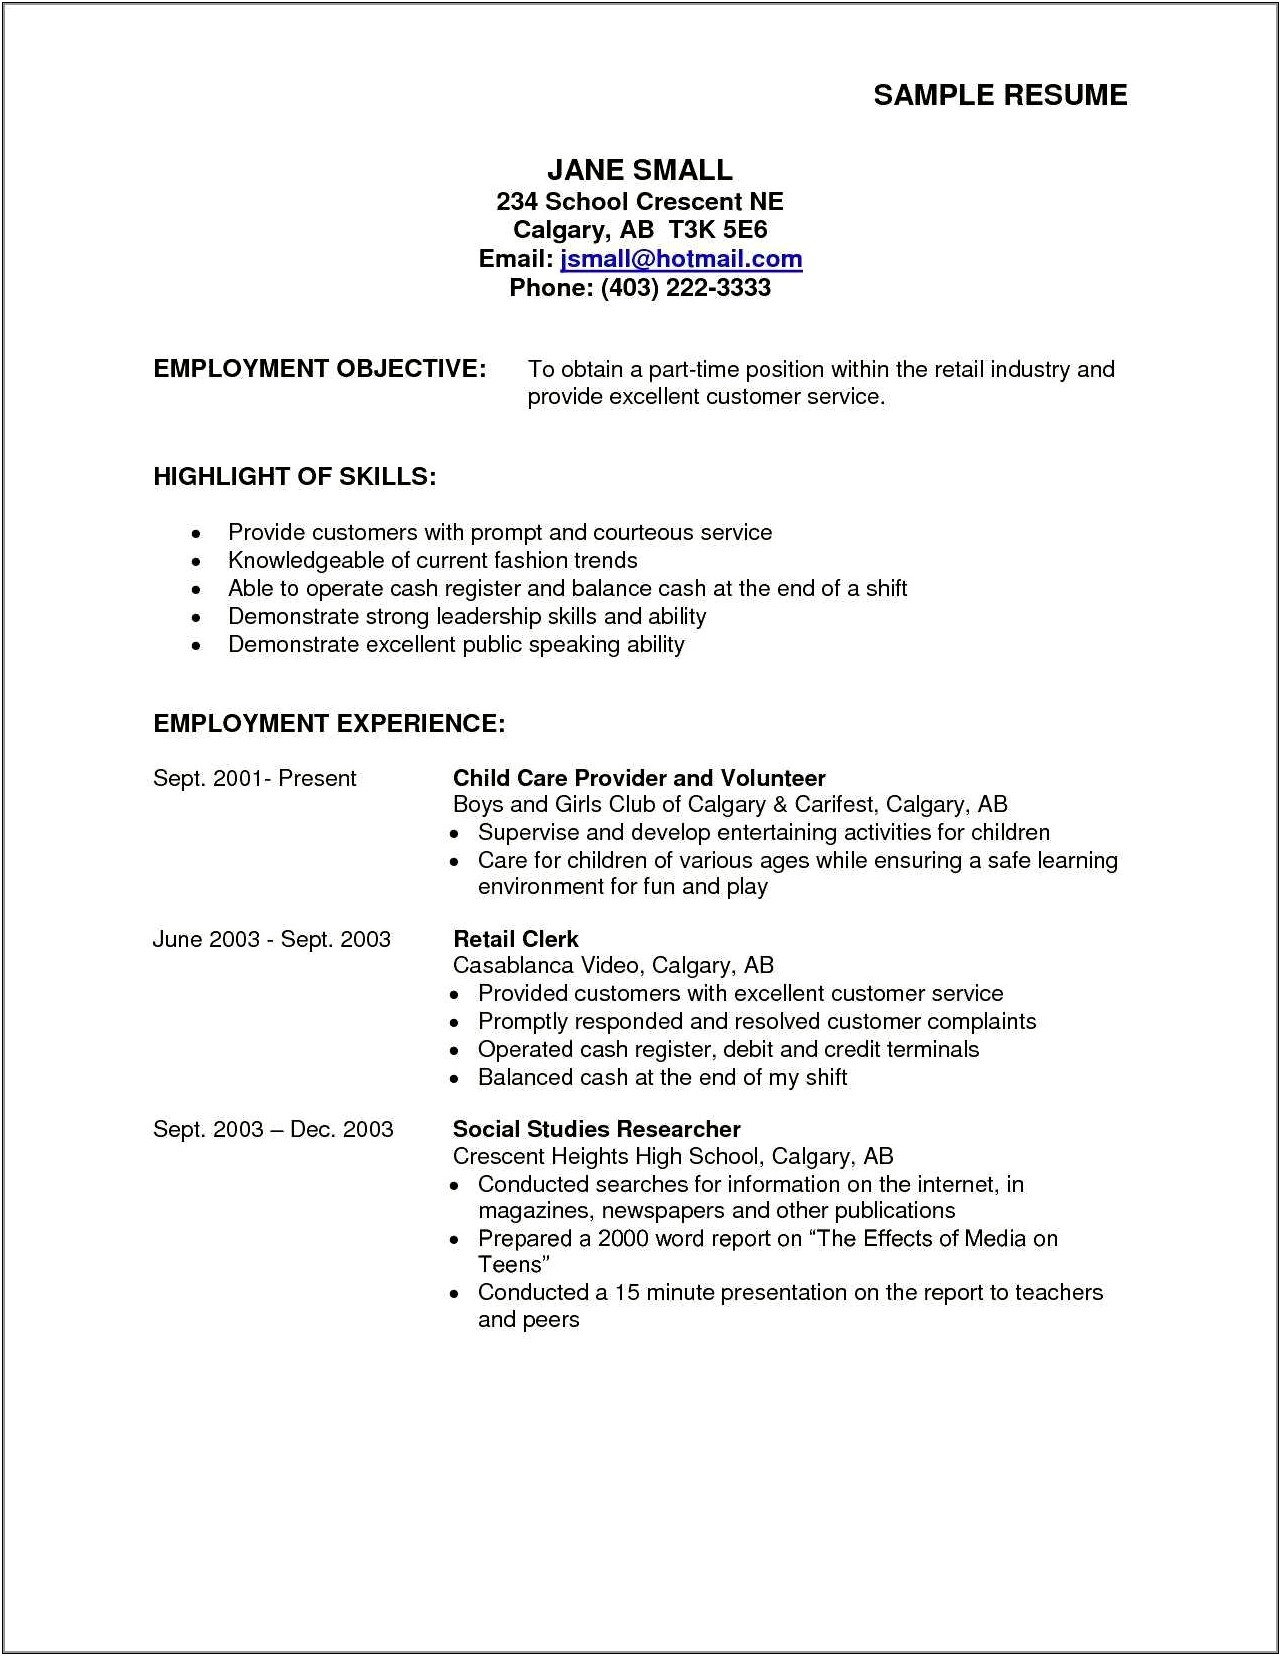 First Time Resume With No Experience Samples Objective